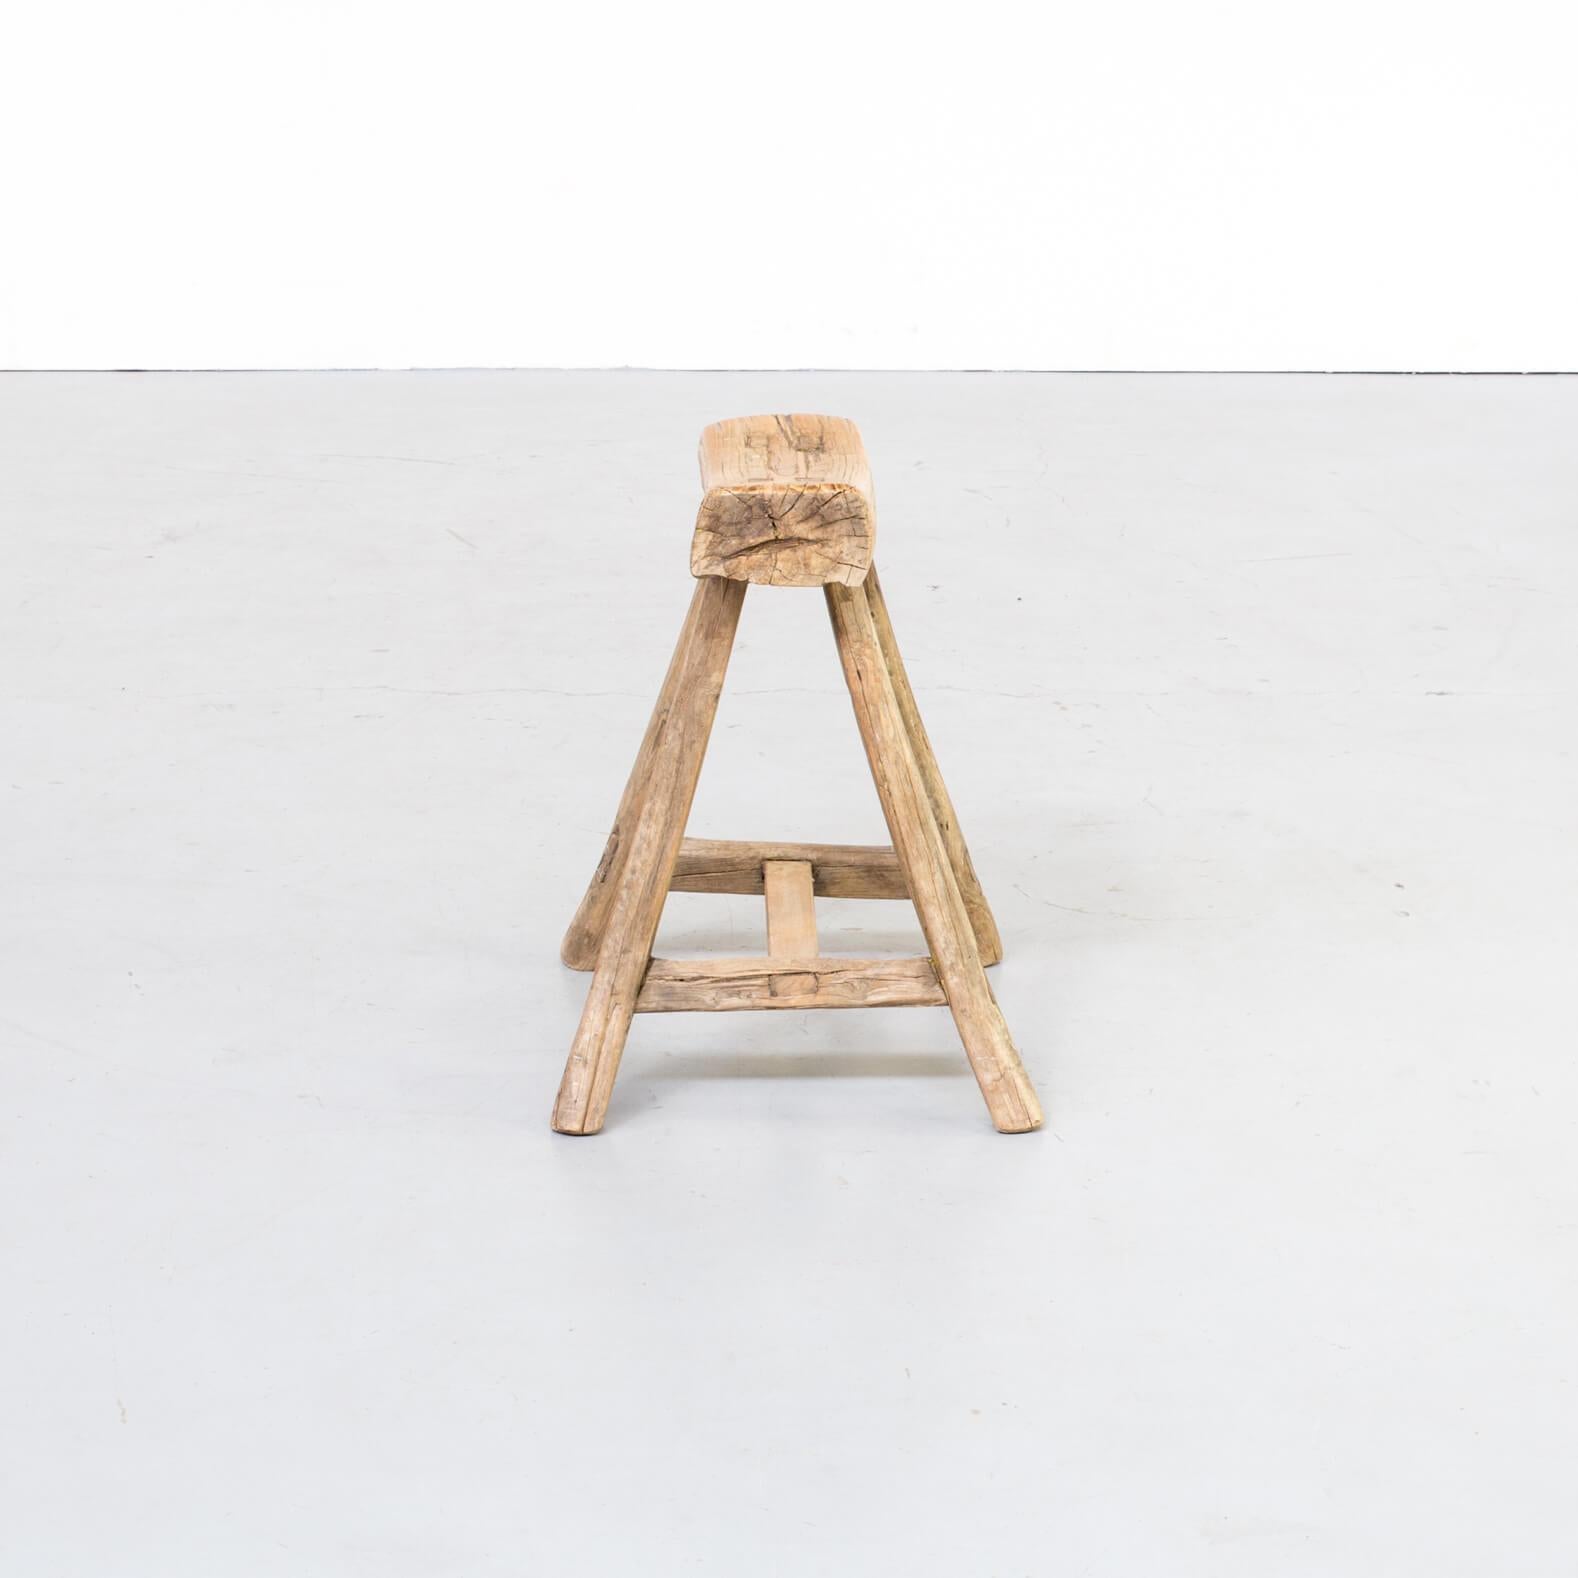 Is it a wooden stool or a chopping block? In the past, people sometimes used a small heel stool to decapitate poultry. That seems crude but in those times it was a very common property for people who had poultry at home for their own consumption.